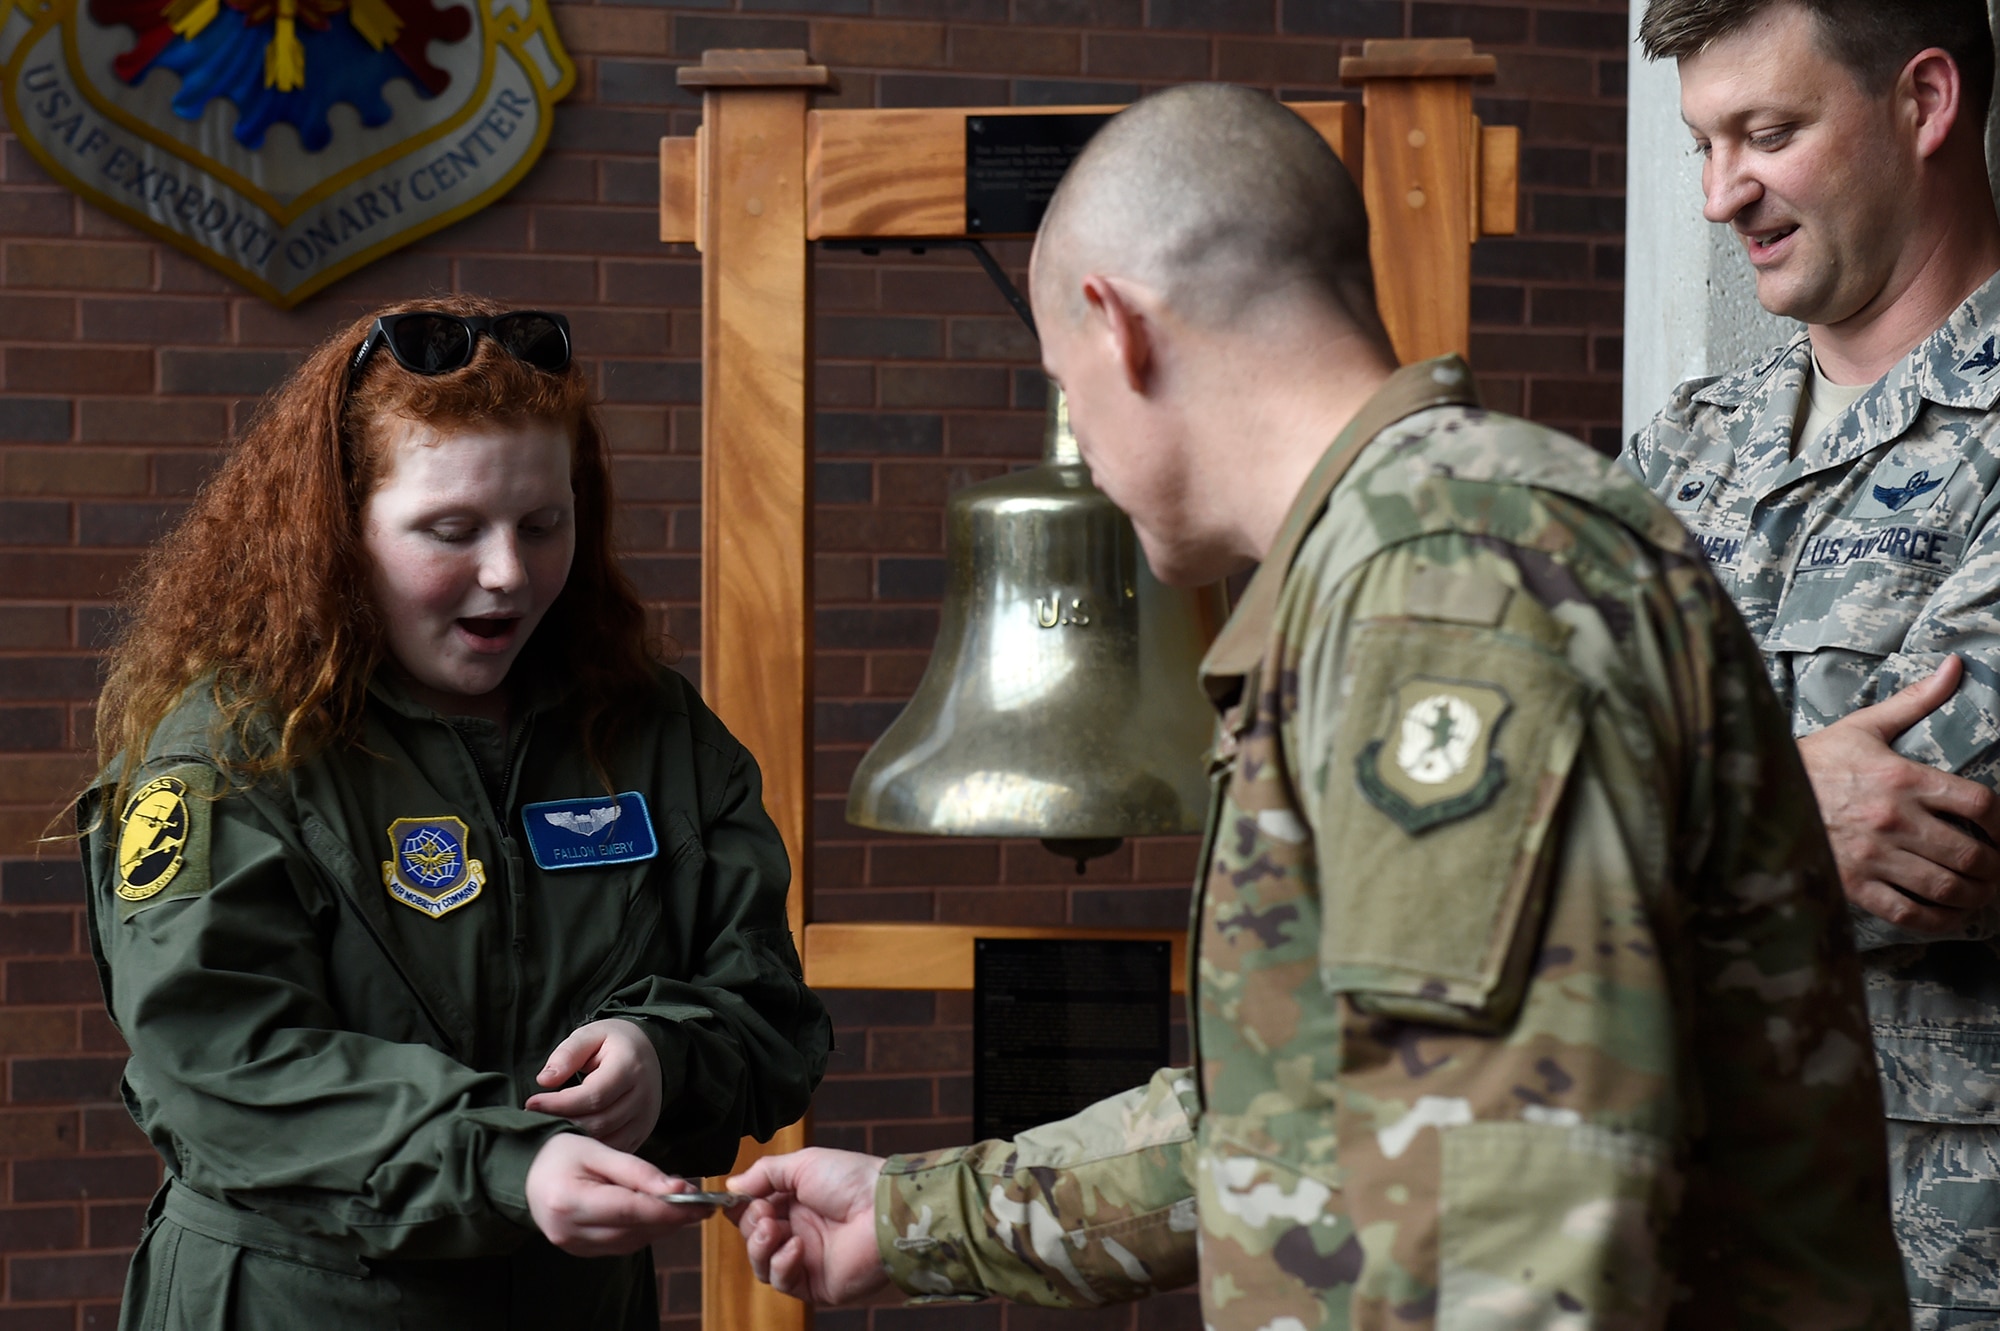 Fallon Emery, a new honorary member of the 437th Operations Support Squadron, accepts a challenge coin from Chief Master Sgt. Ronnie Phillips, 437th Airlift Wing command chief master sergeant, Nov. 7, 2018, at Joint Base Charleston, S.C., as part of the Airman for a Day program.